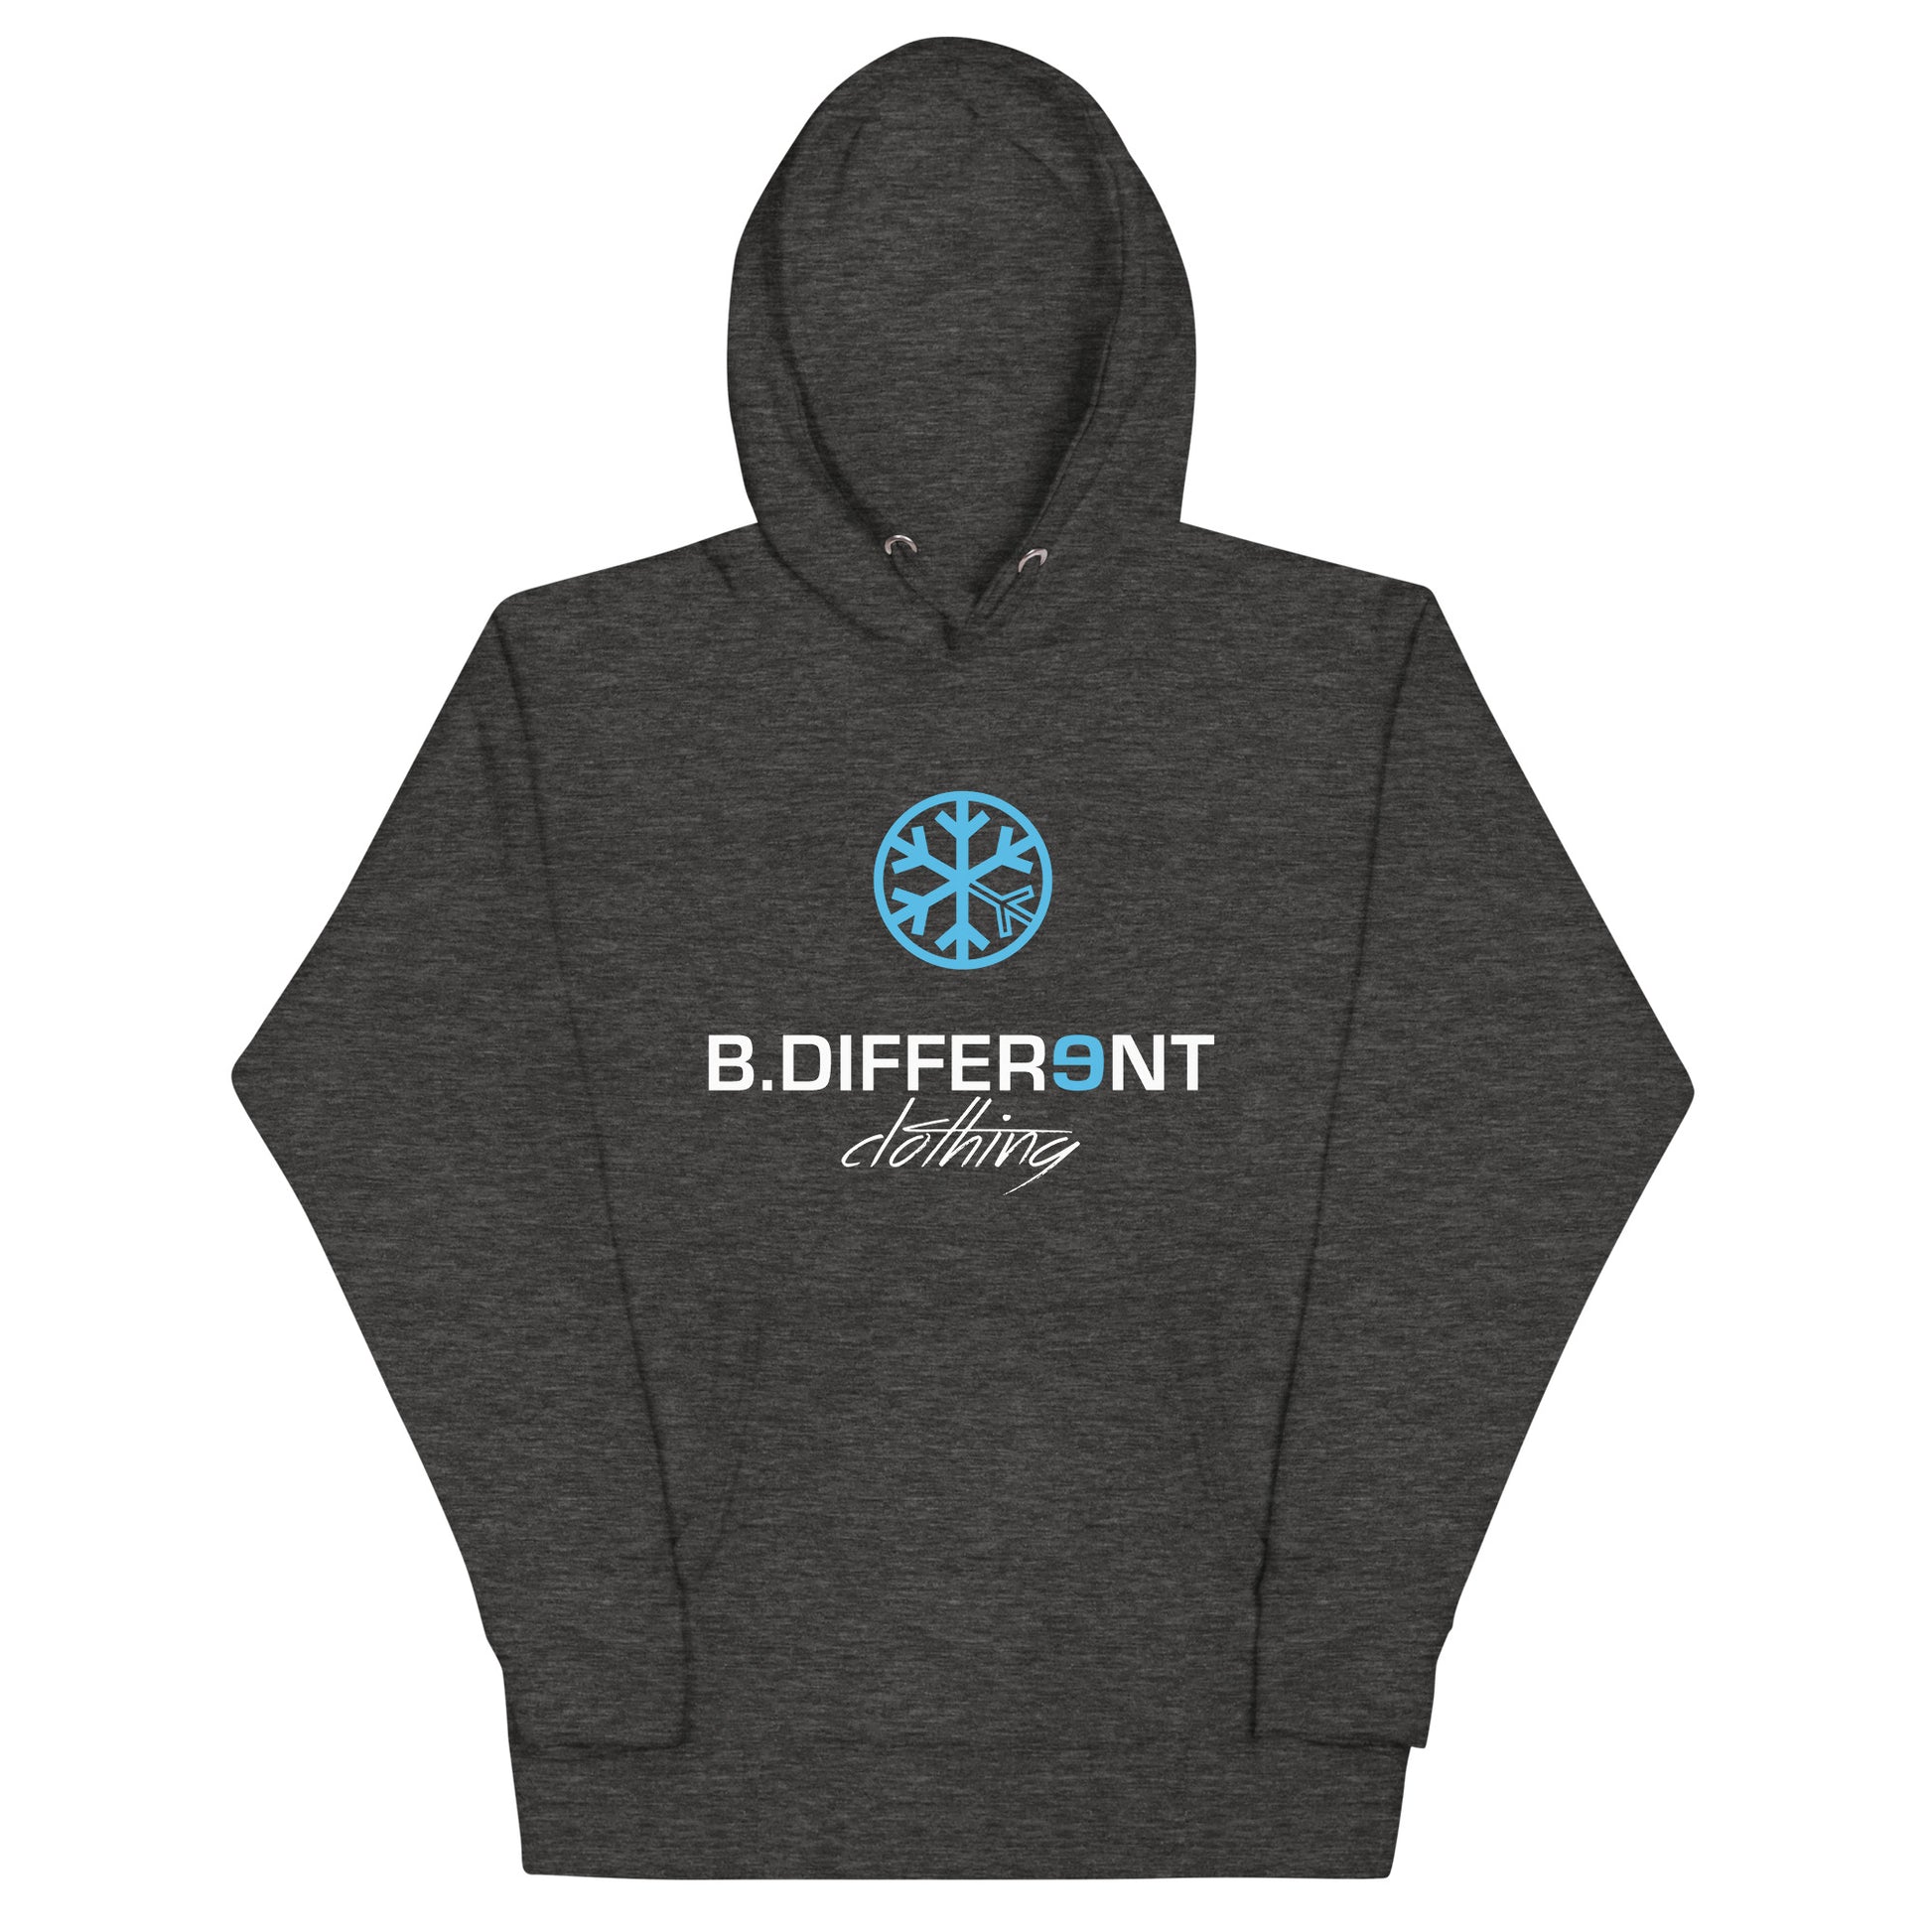 hoodie Logo dark gray by B.Different Clothing independent streetwear brand inspired by street art graffiti